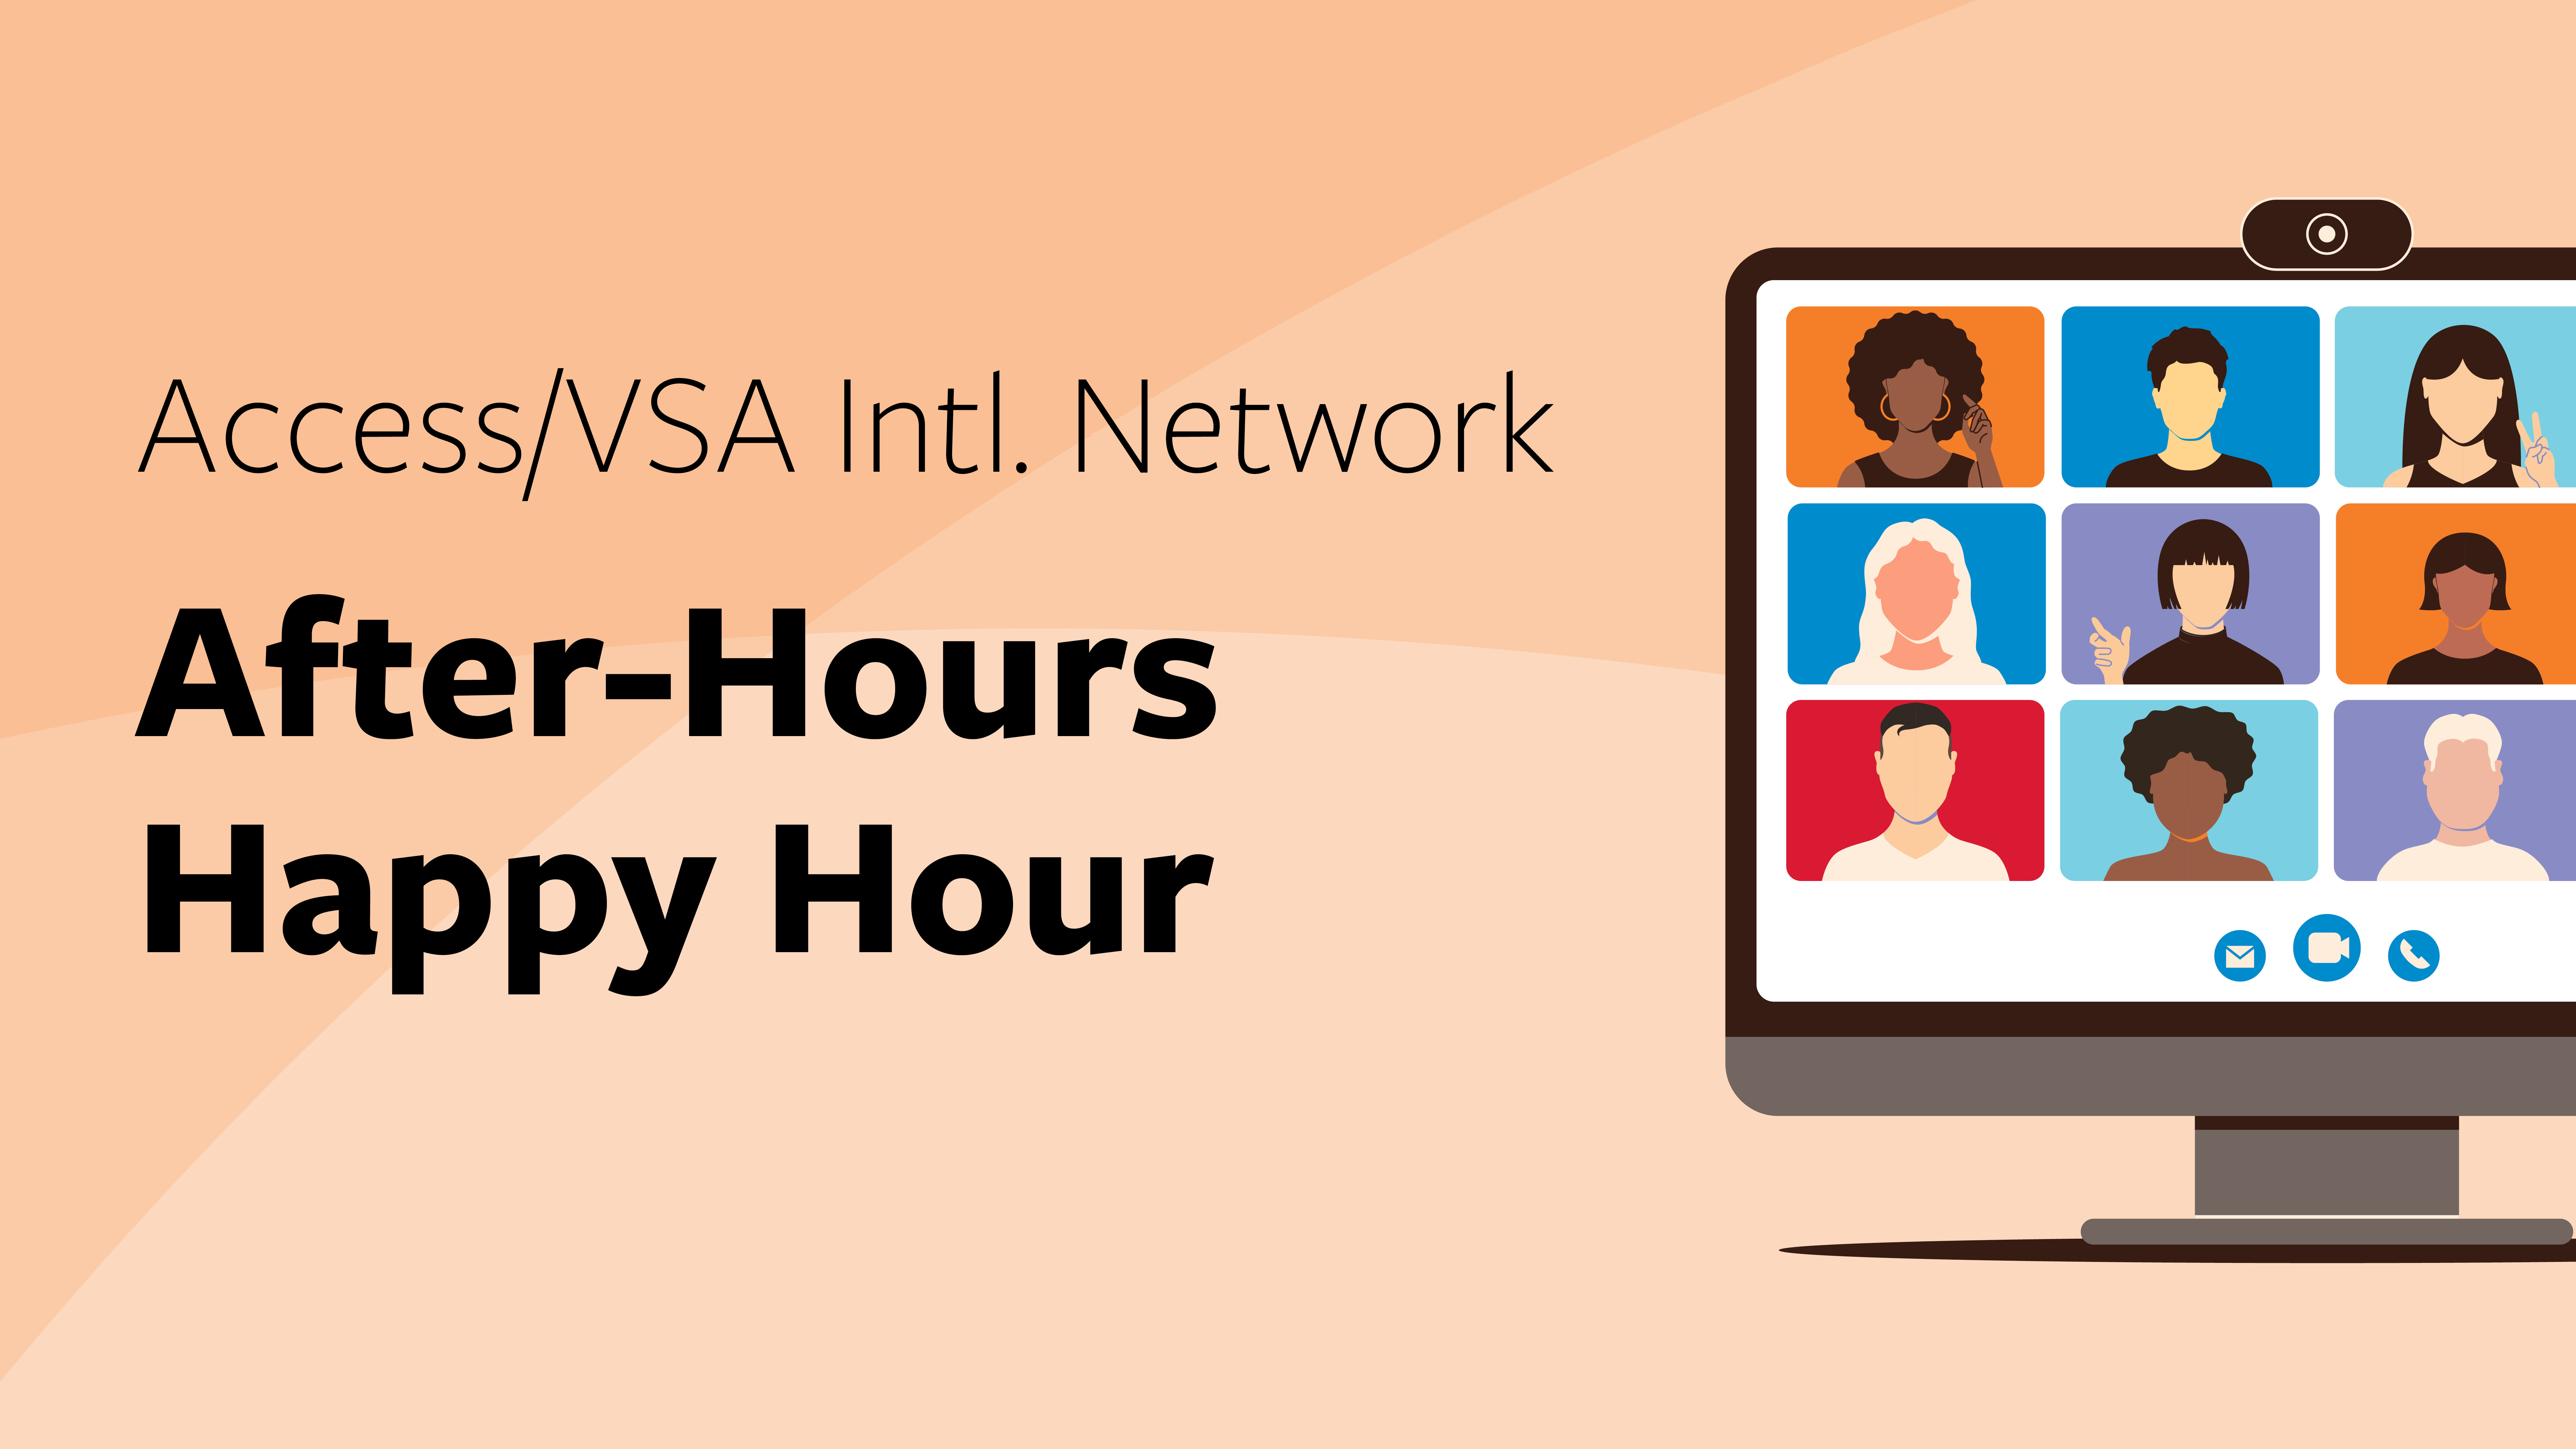 Graphic with an orange background and black text that reads “Access/VSA Intl. Network After-Hours Happy Hour with a colorful graphic of people on a zoom call on the right side.